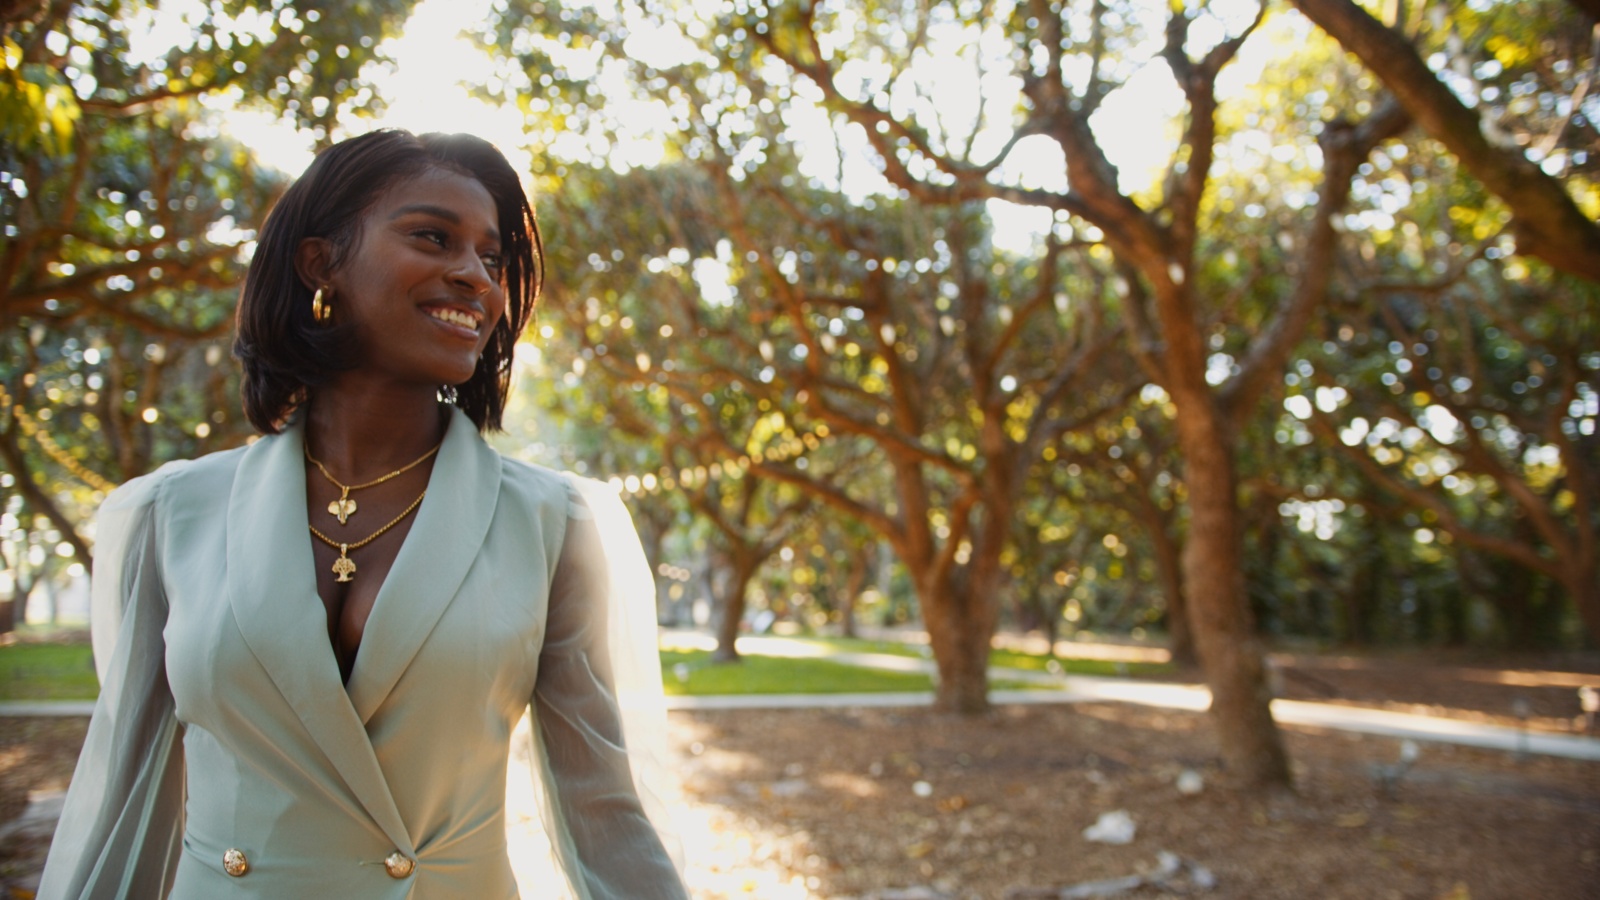 African American woman wearing a white dress coat looking off to the side smiling in a park